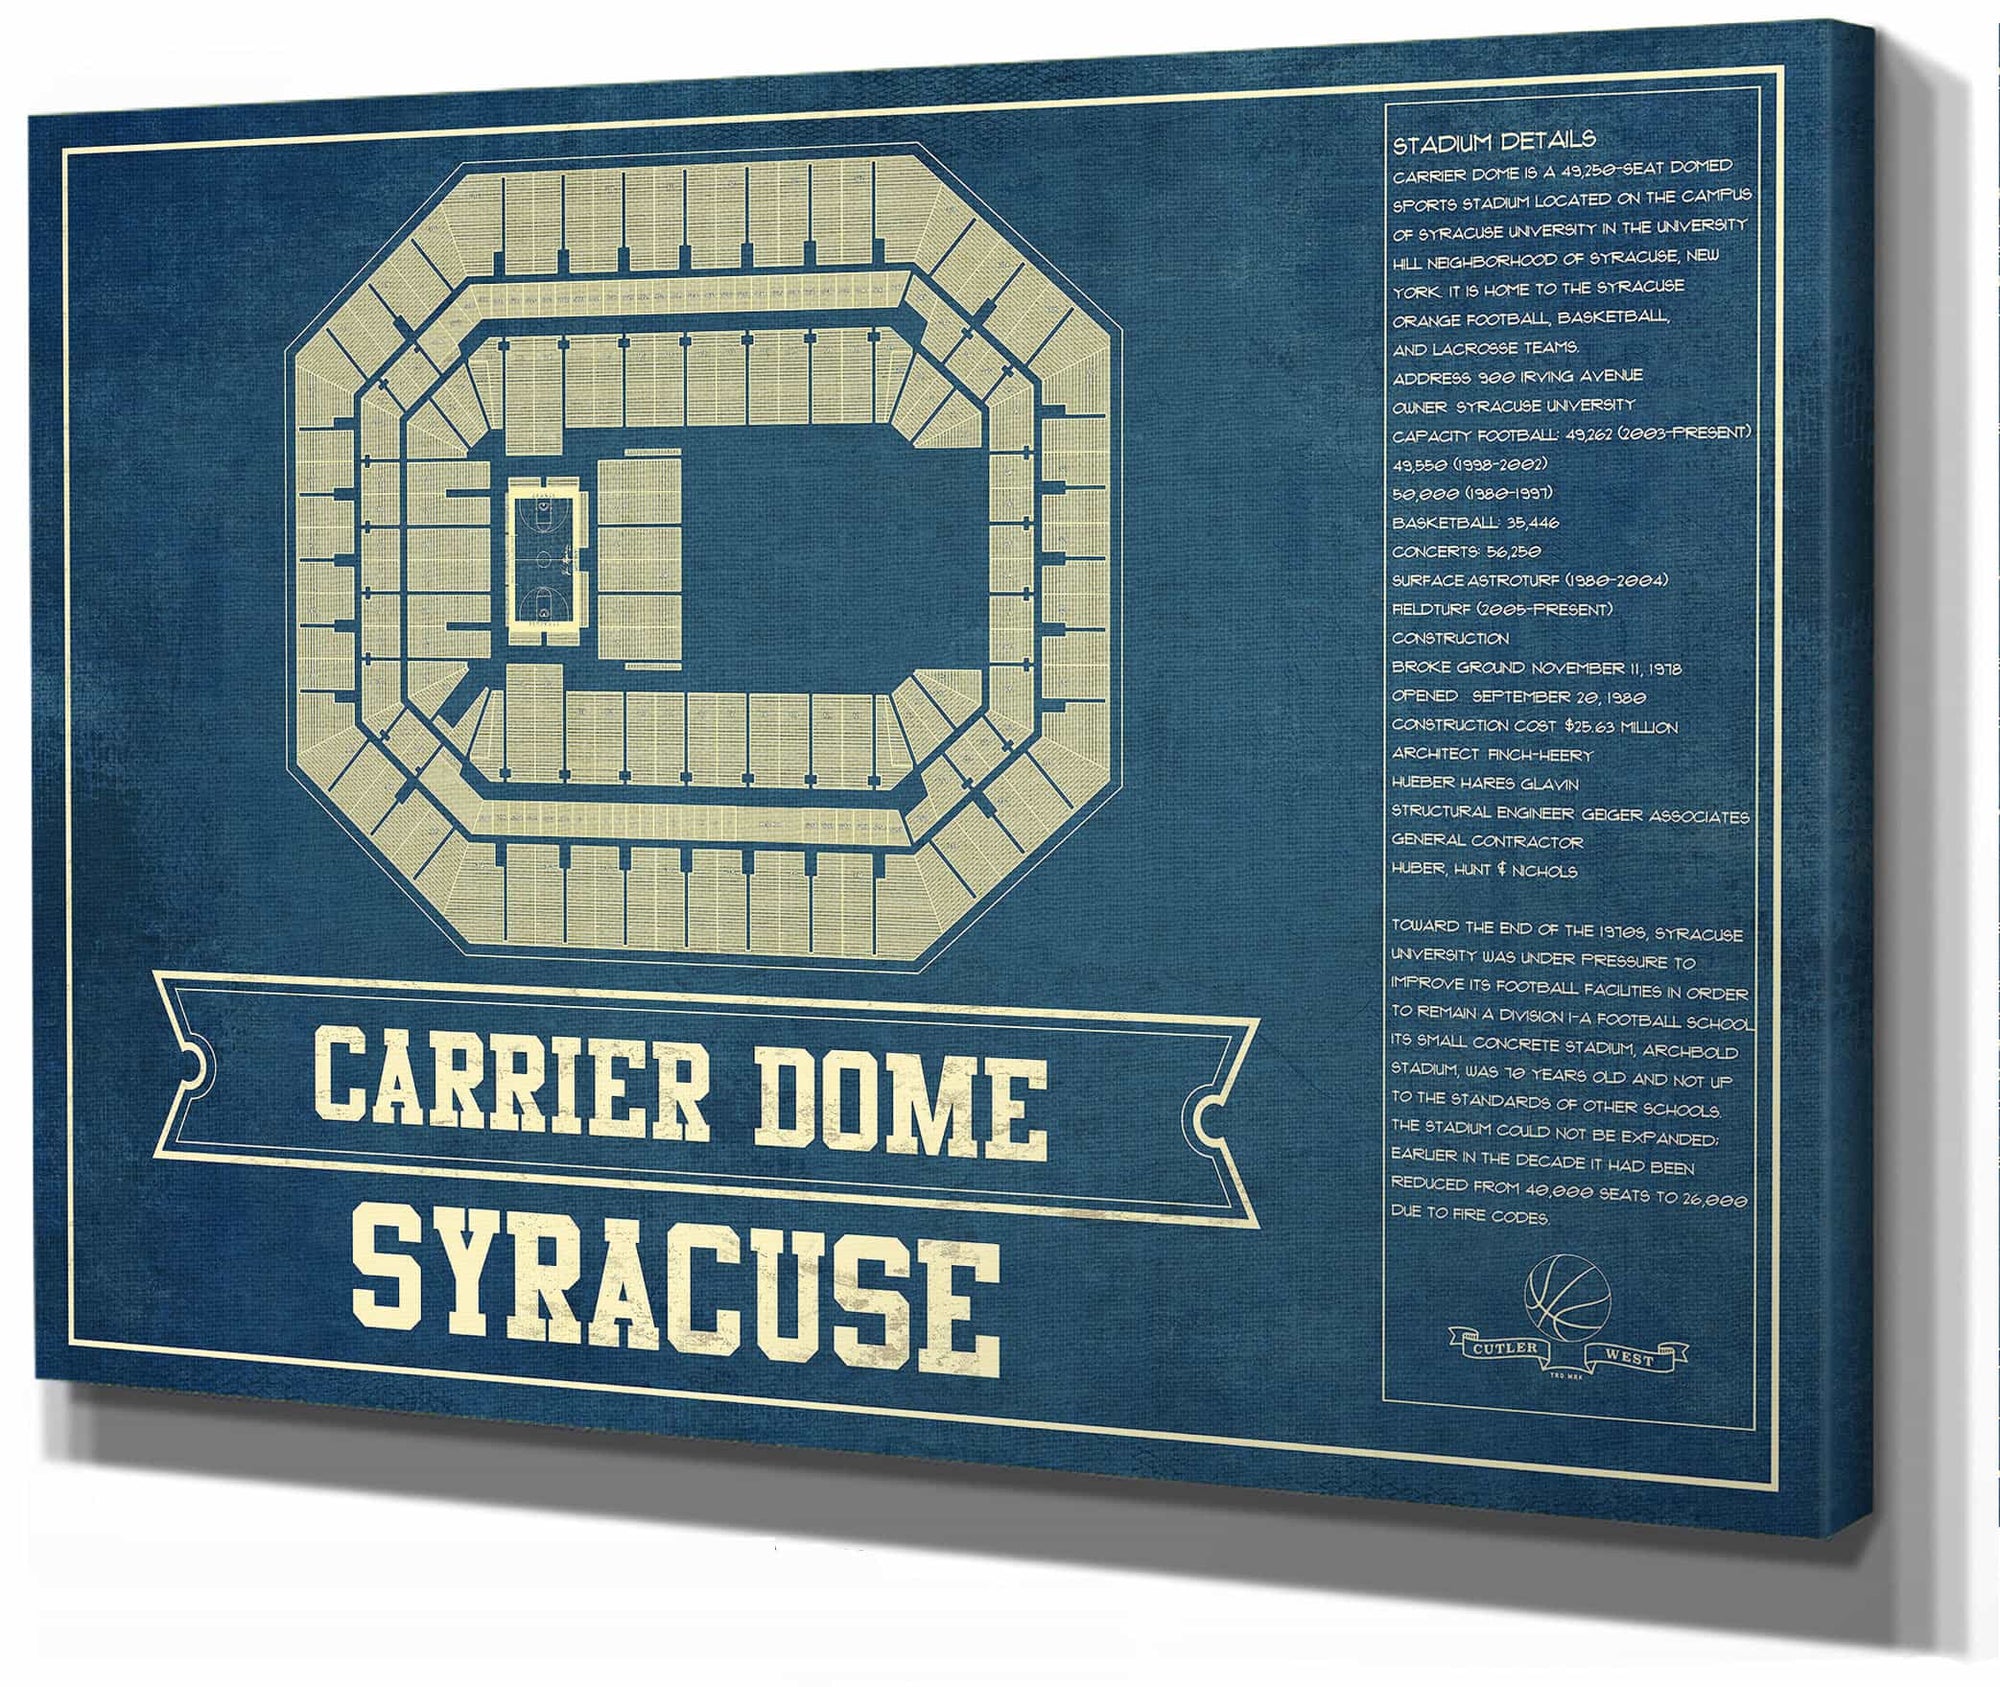 Syracuse Orange - Carrier Dome Seating Chart - College Basketball Blueprint Art